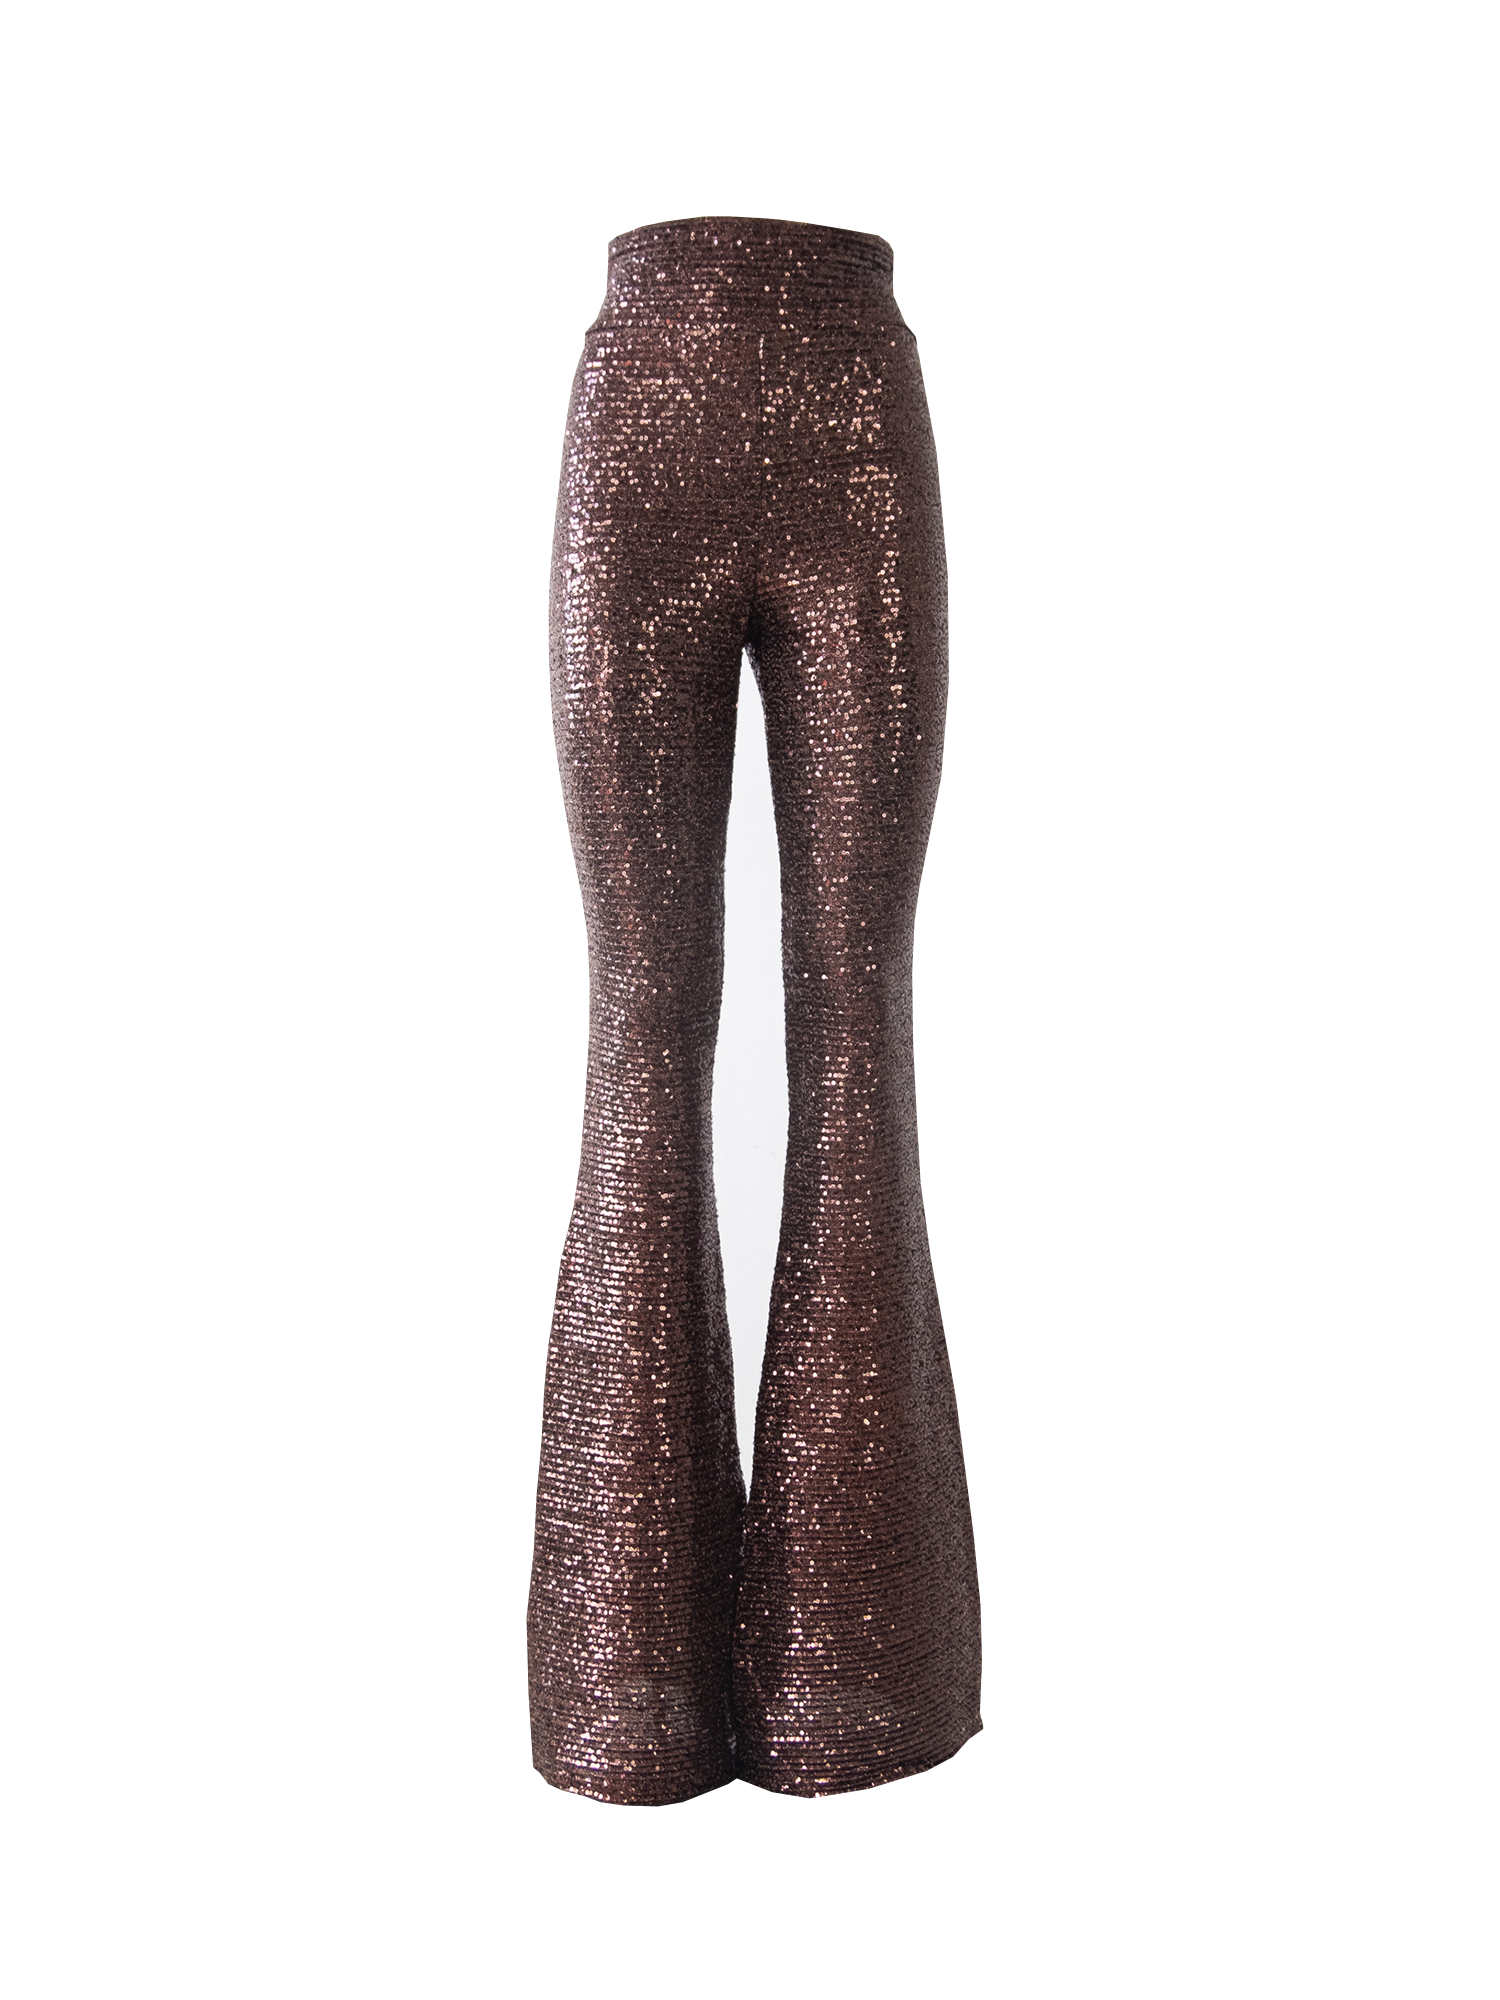 LOLA - flared pants in brown sequins